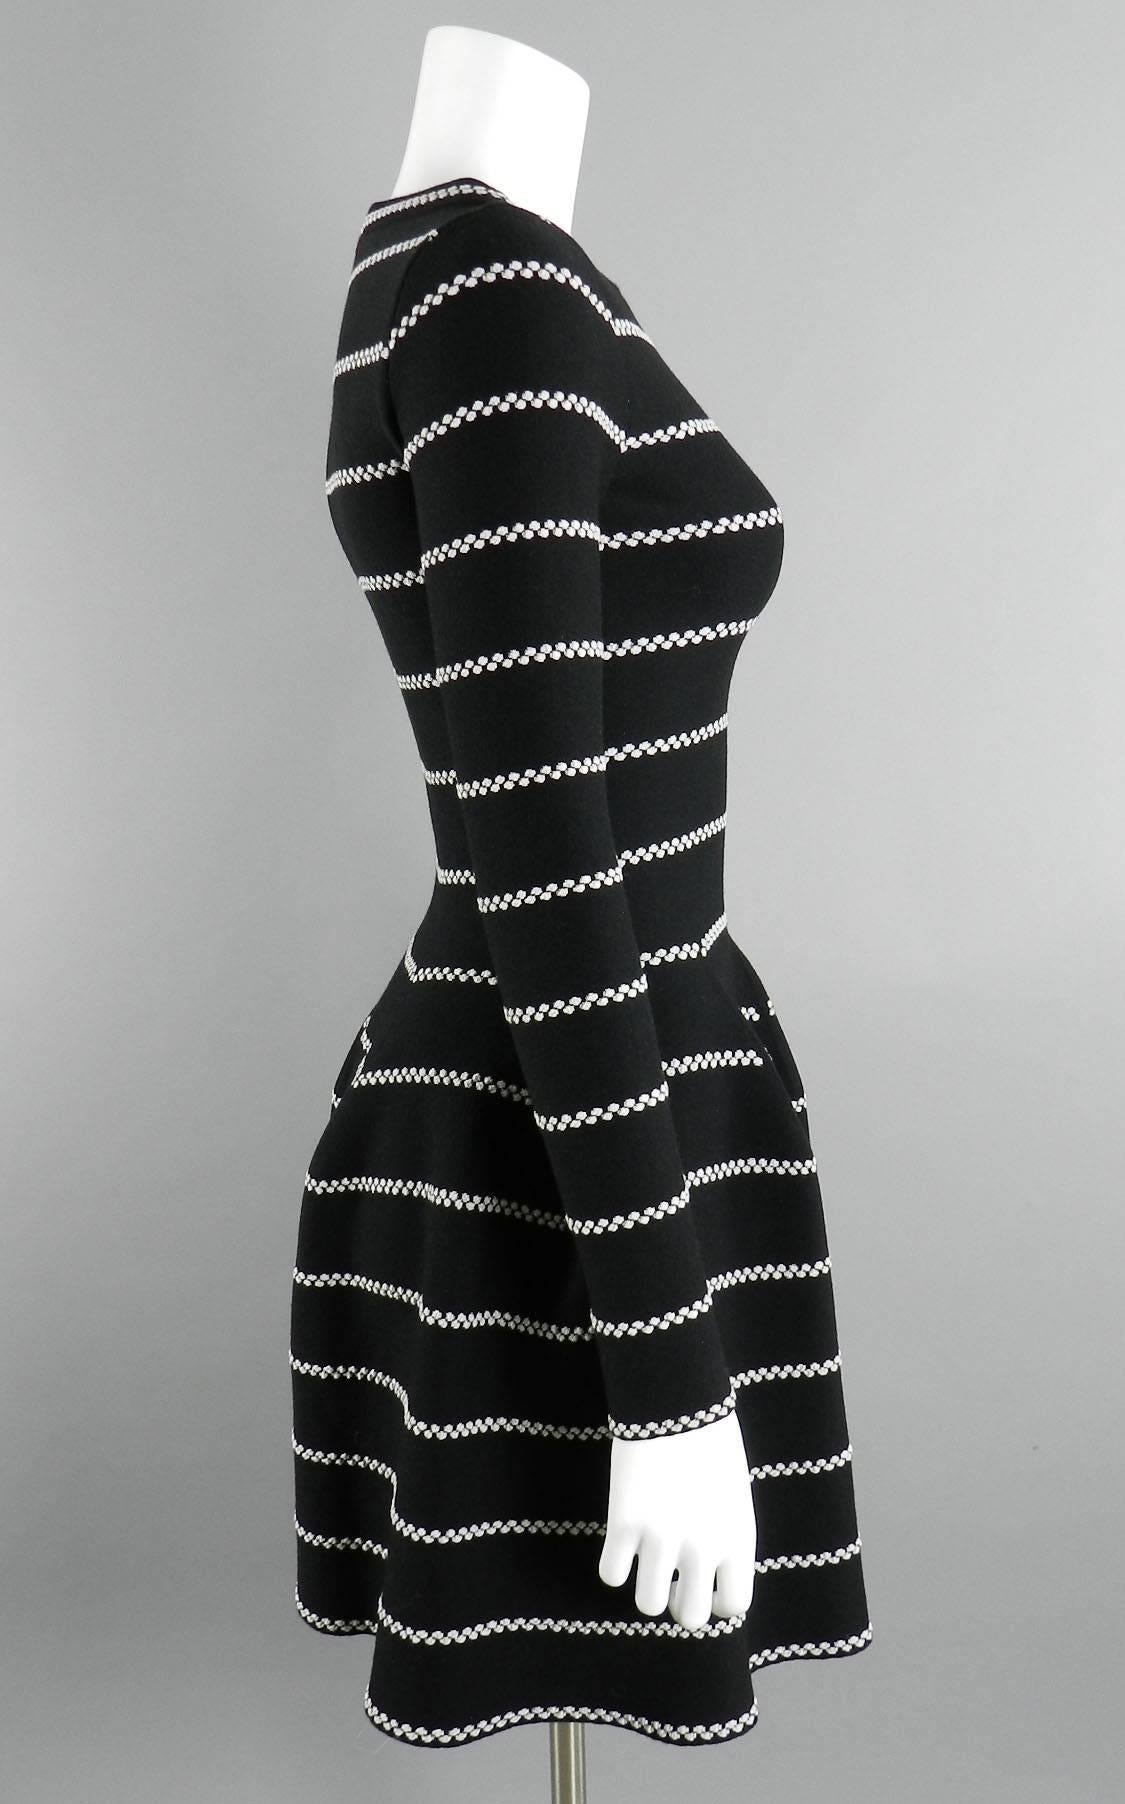 Alaia black and silver striped dress. Excellent pre-owned condition - worn once. Tagged size Alaia 38. Best for a USA 4. Thick stretch knit. Garment will fit a 32-34